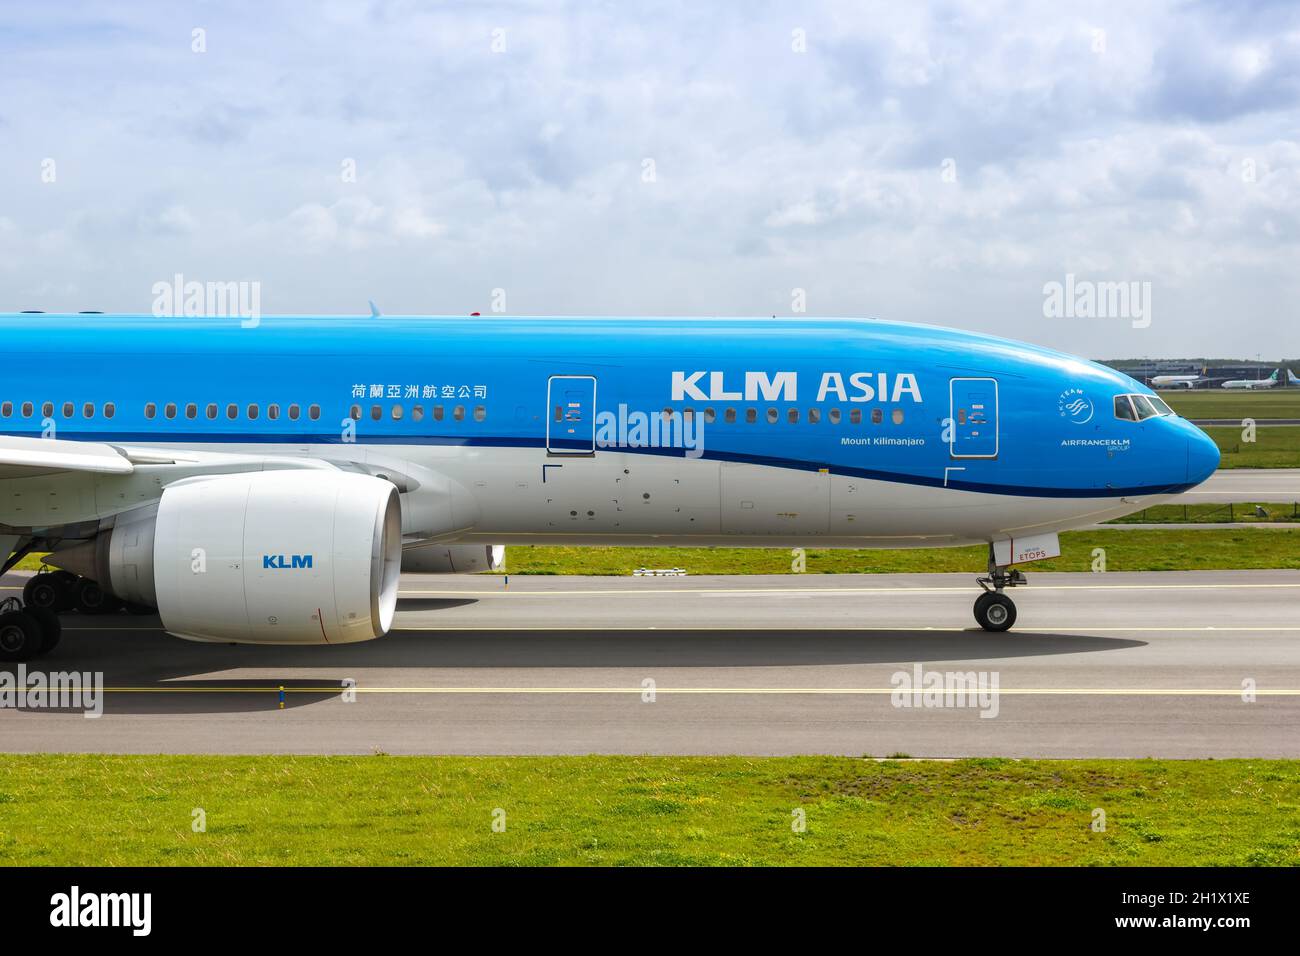 Amsterdam, Netherlands - May 21, 2021: KLM Asia Royal Dutch Airlines Boeing 777-200ER airplane at Amsterdam Schiphol airport (AMS) in the Netherlands. Stock Photo